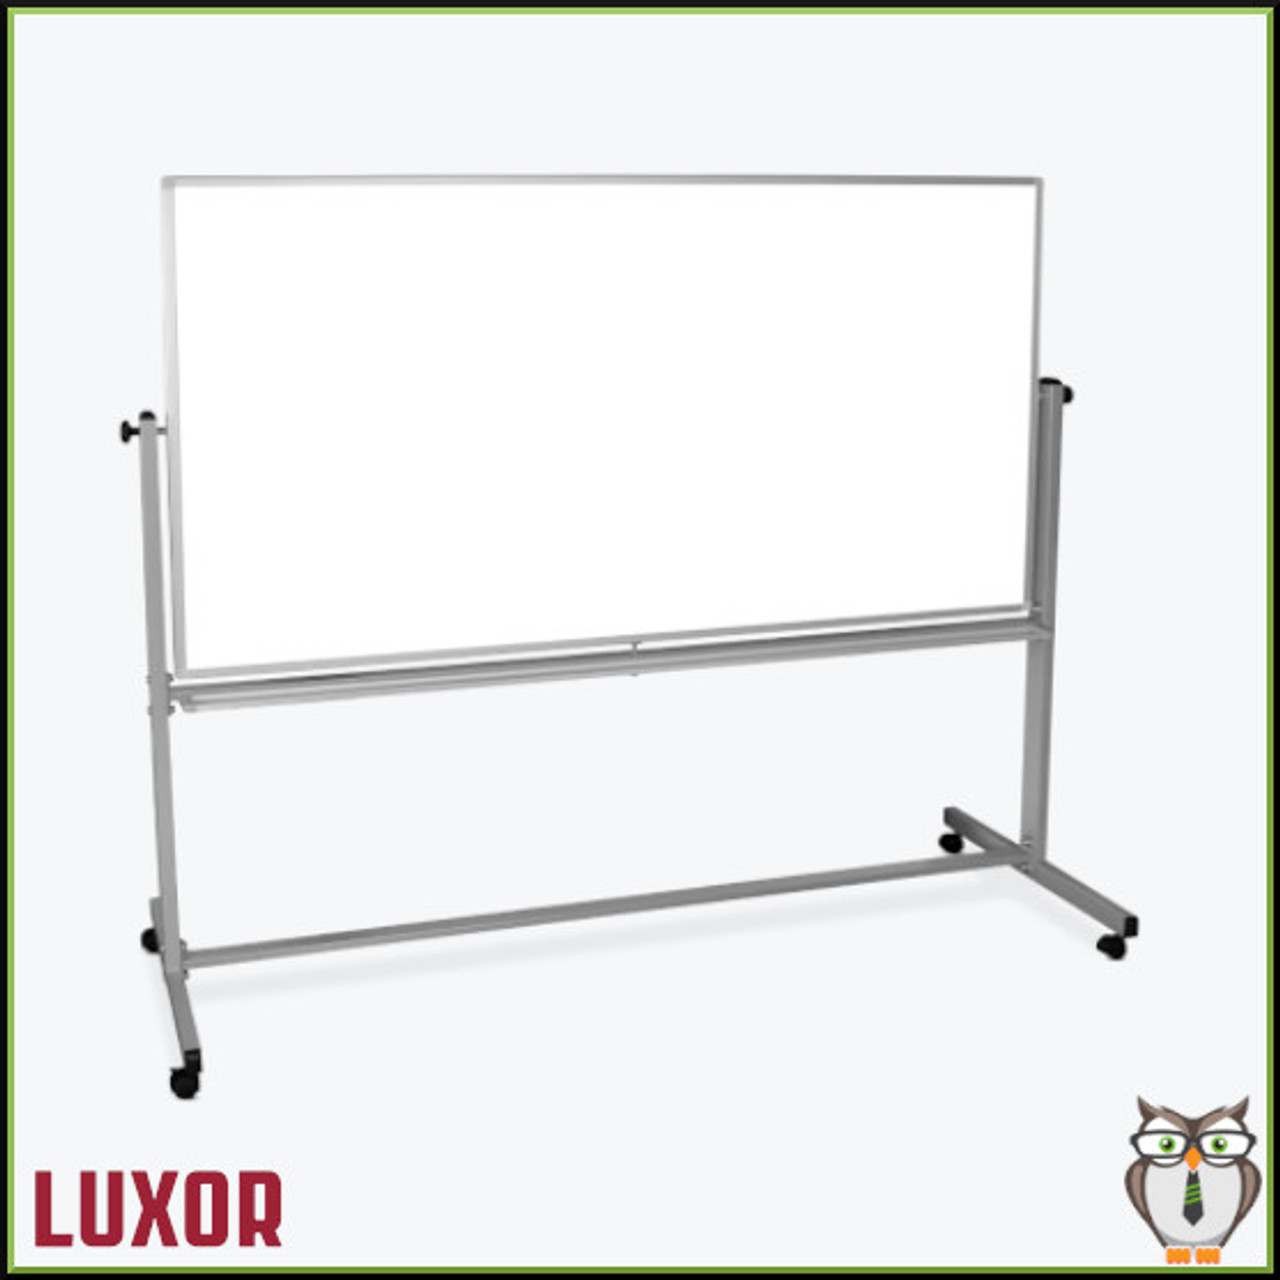 72"W x 40"H Double-Sided Magnetic Whiteboard (MB7240WW) - Front Angle